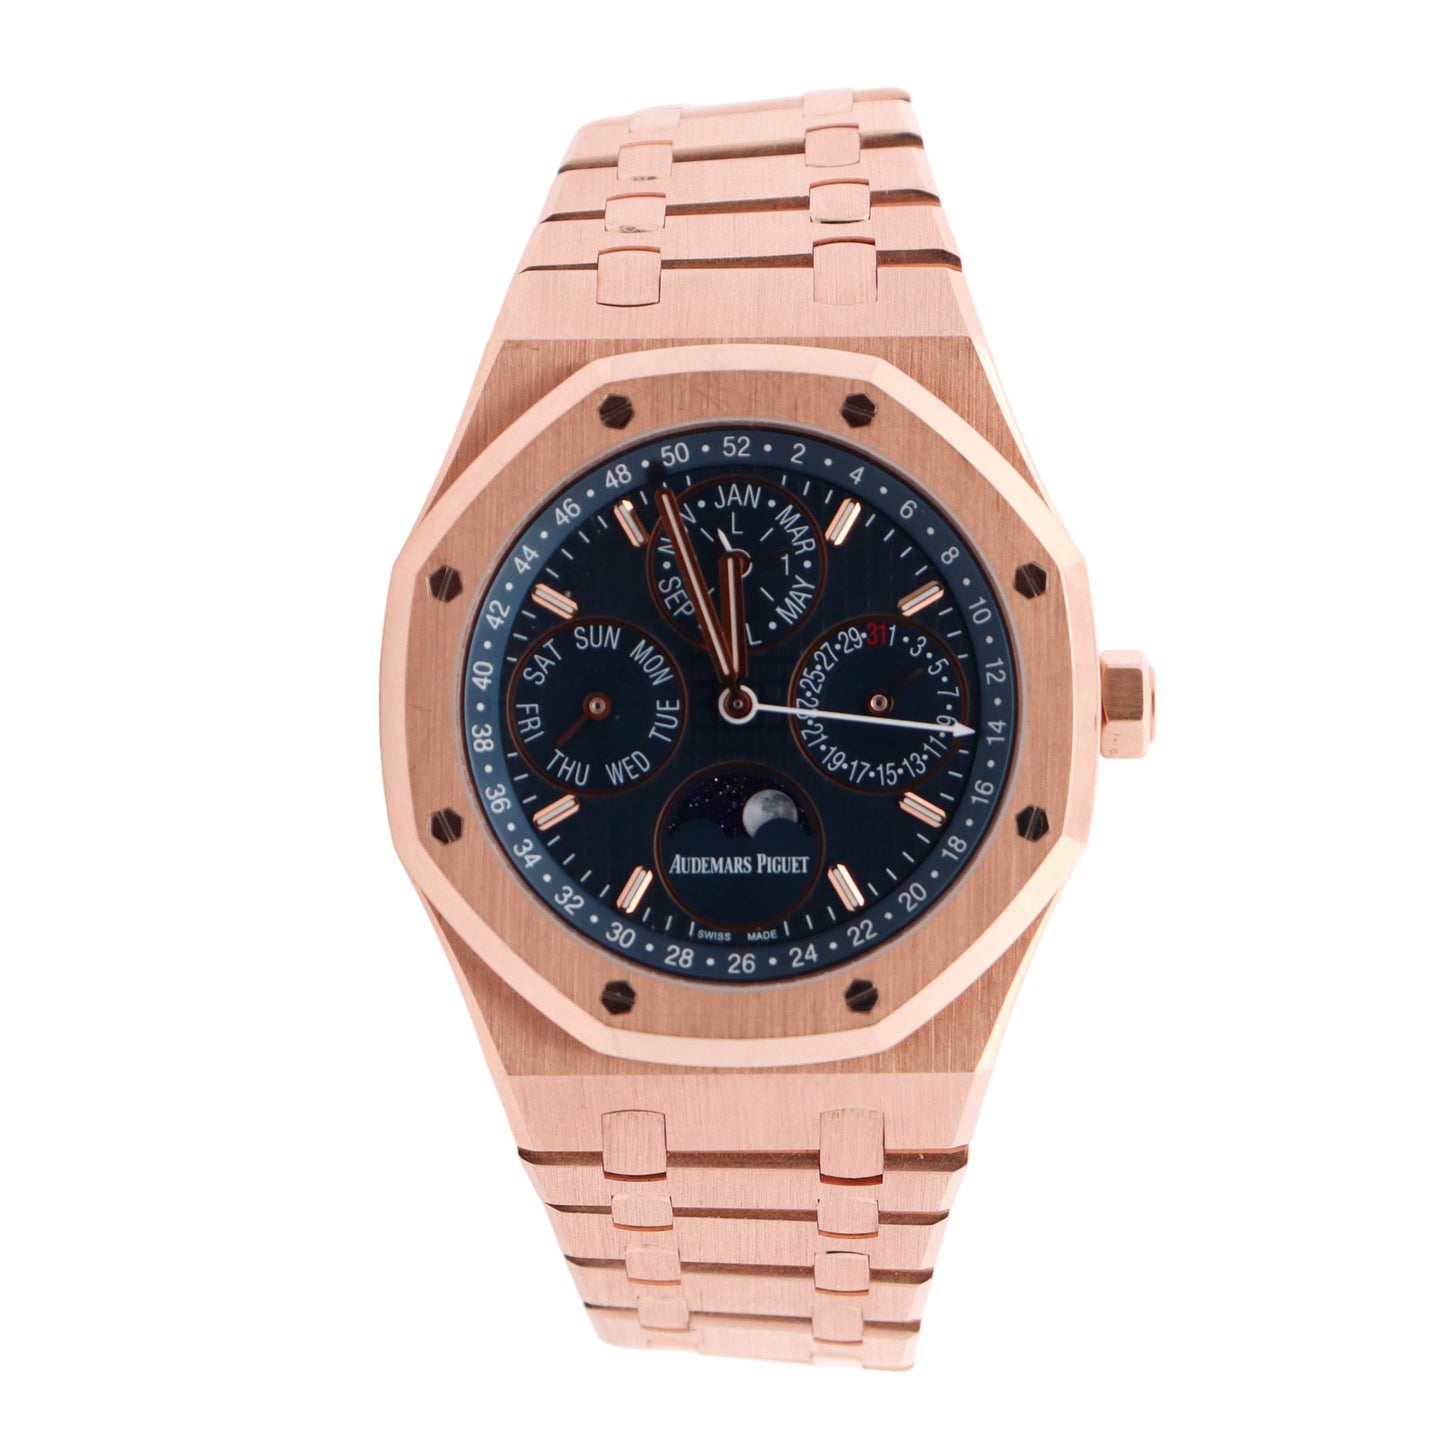 Audemars Piguet Royal Oak Perpetual Calendar Rose Gold Blue Stick Dial Watch Reference #: 26574OR.OO.1220OR.03 - Happy Jewelers Fine Jewelry Lifetime Warranty